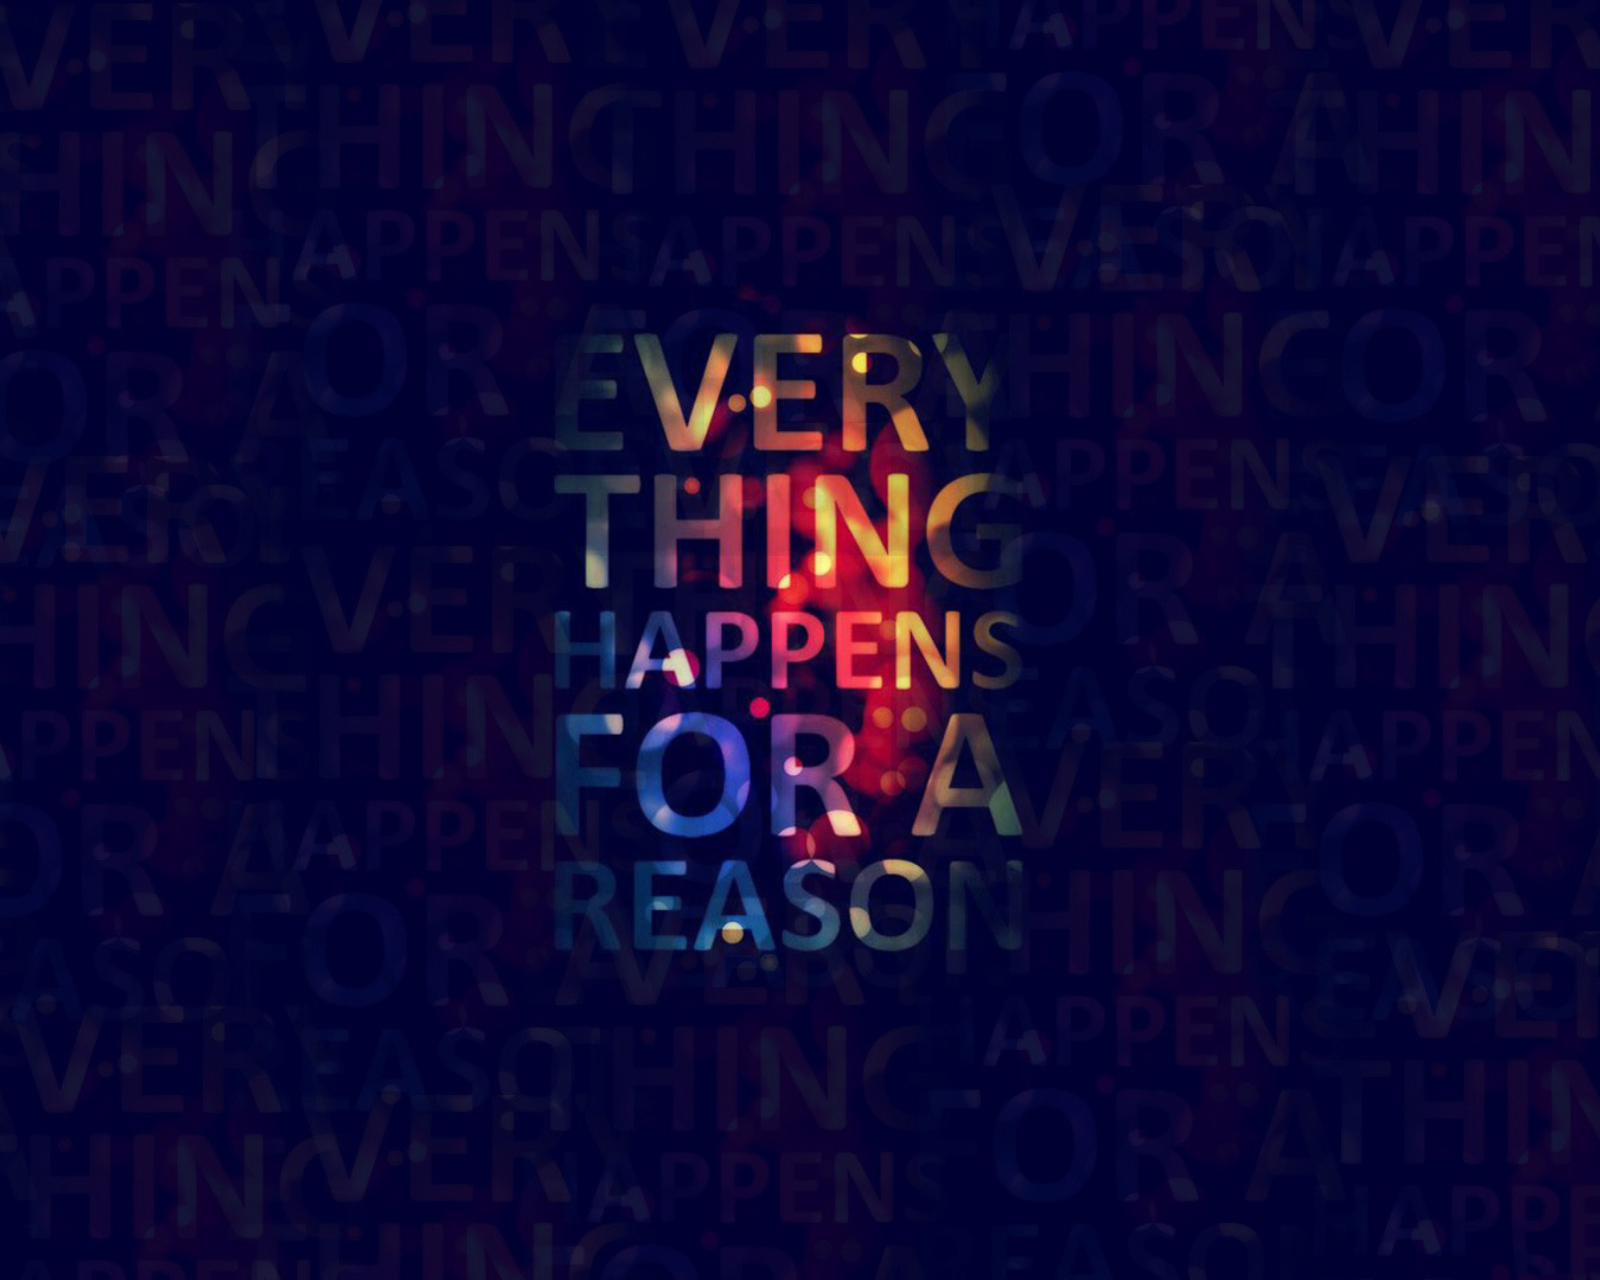 Everything Happens For A Reason wallpaper 1600x1280